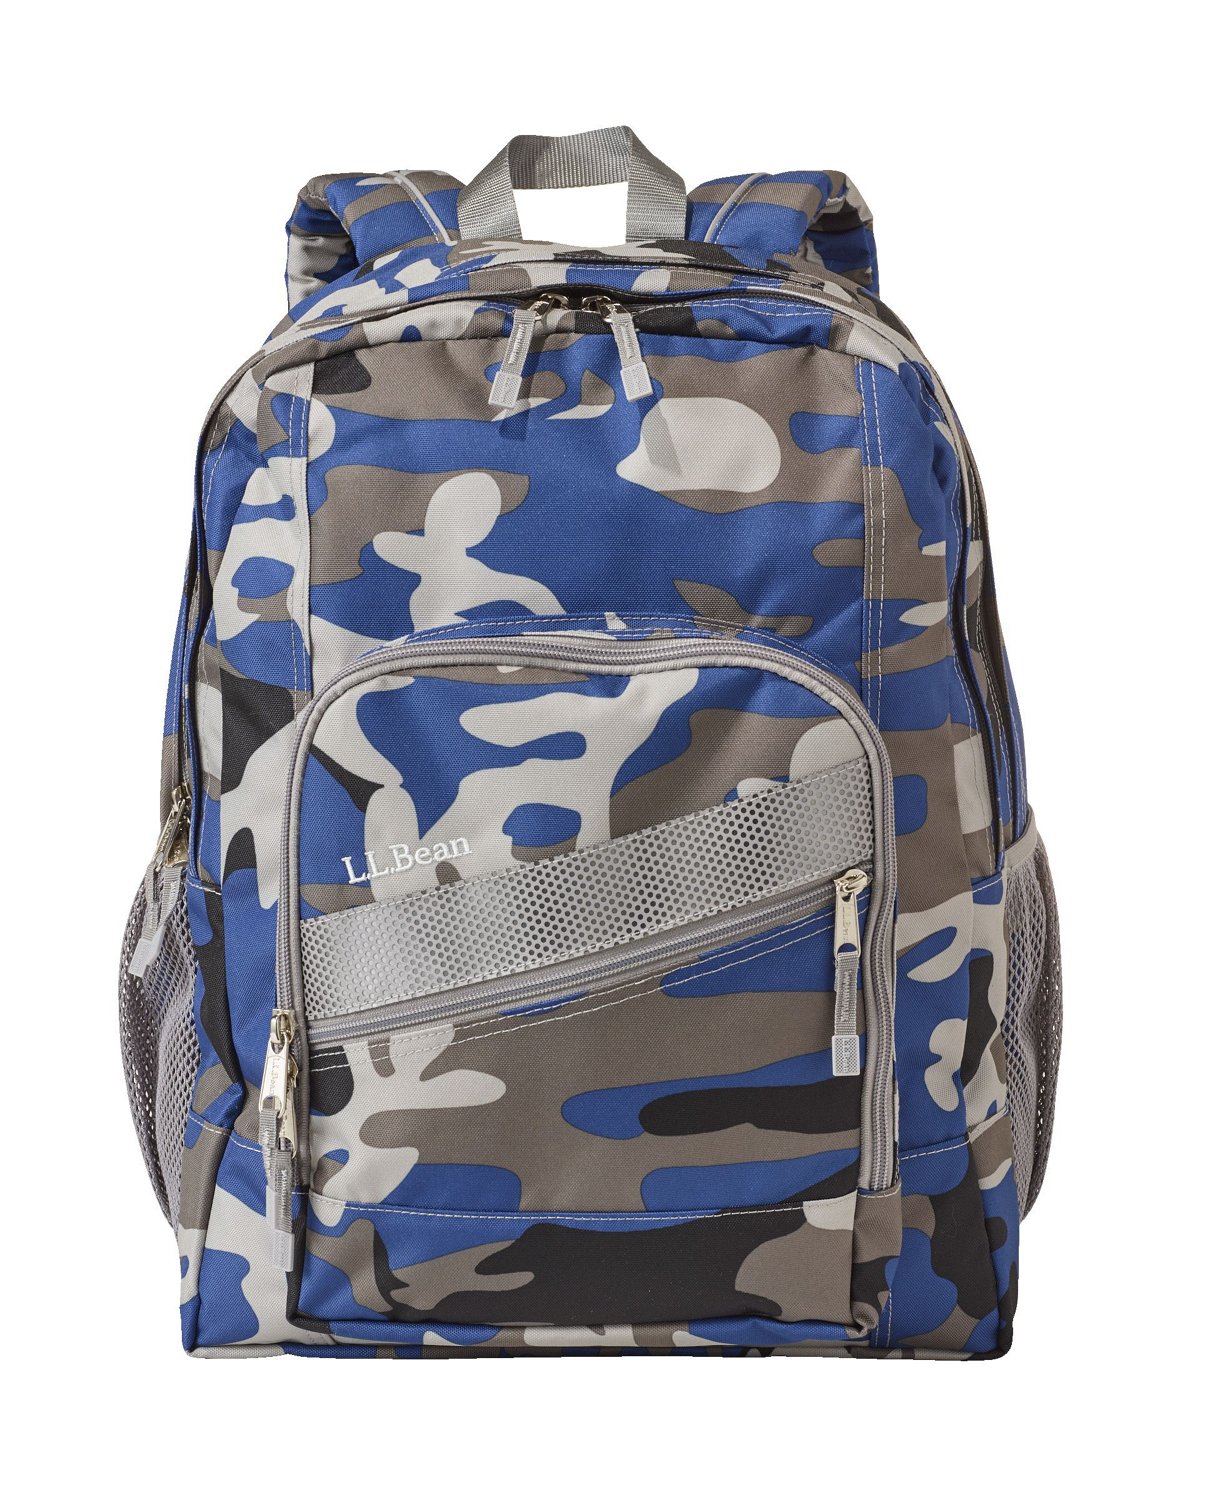 https://academy.scene7.com/is/image/academy//bags---backpacks/llbean-deluxe-camo-backpack-137988-blue/7e81224ee7cc437a9804c6604be20ca8?$pdp-gallery-ng$